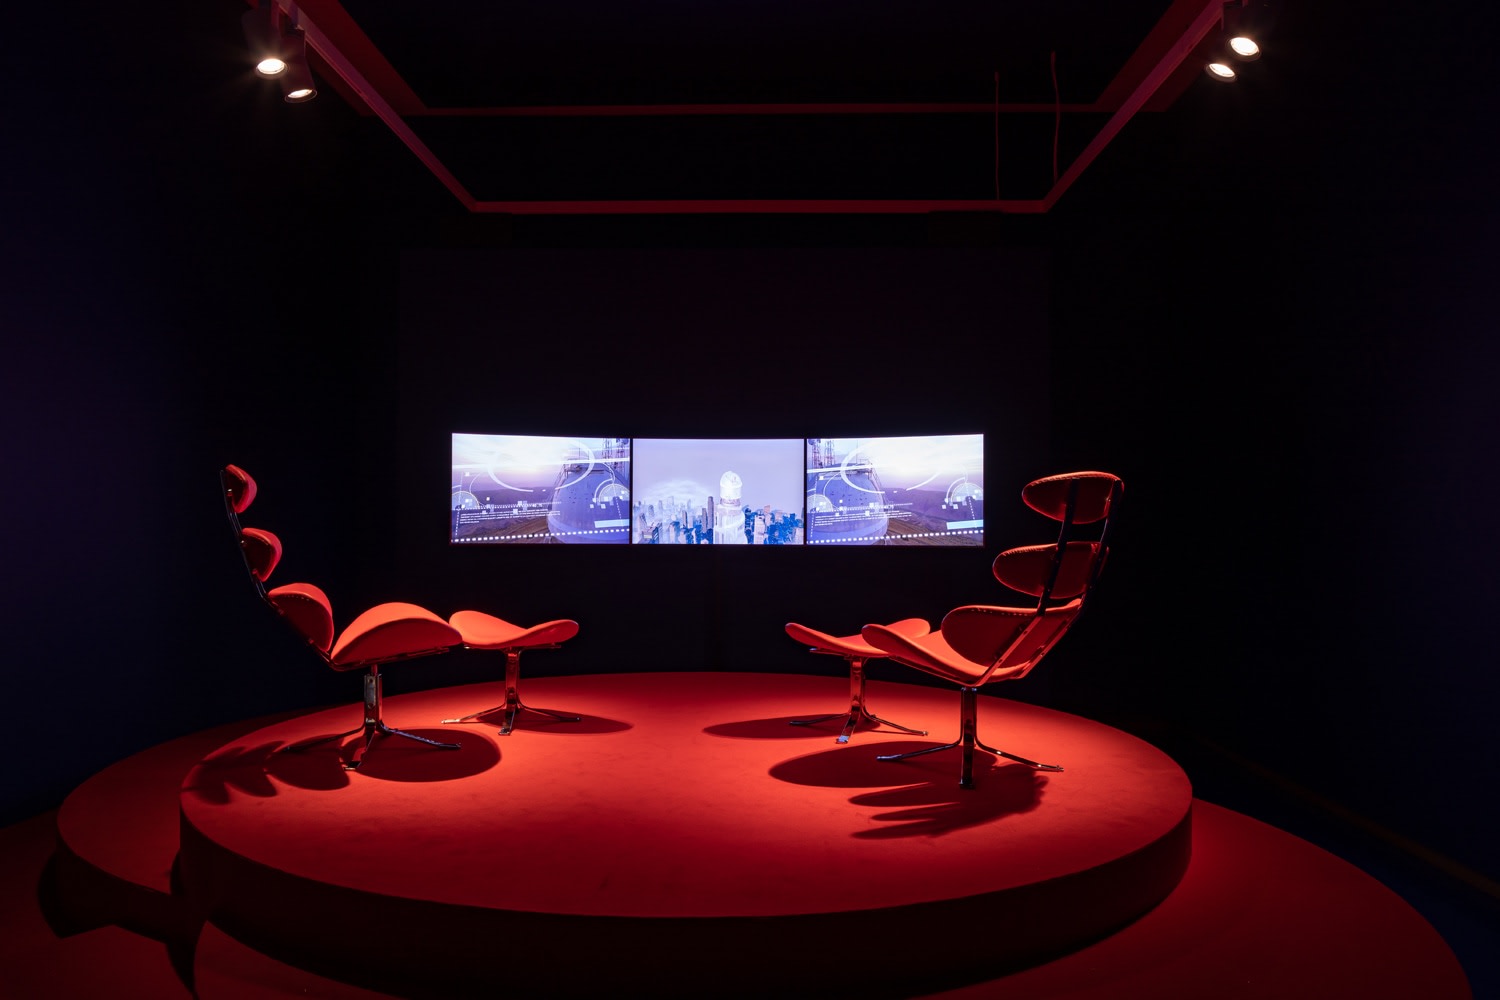 Hito Steyerl, Hito Steyerl: I WIll Survive